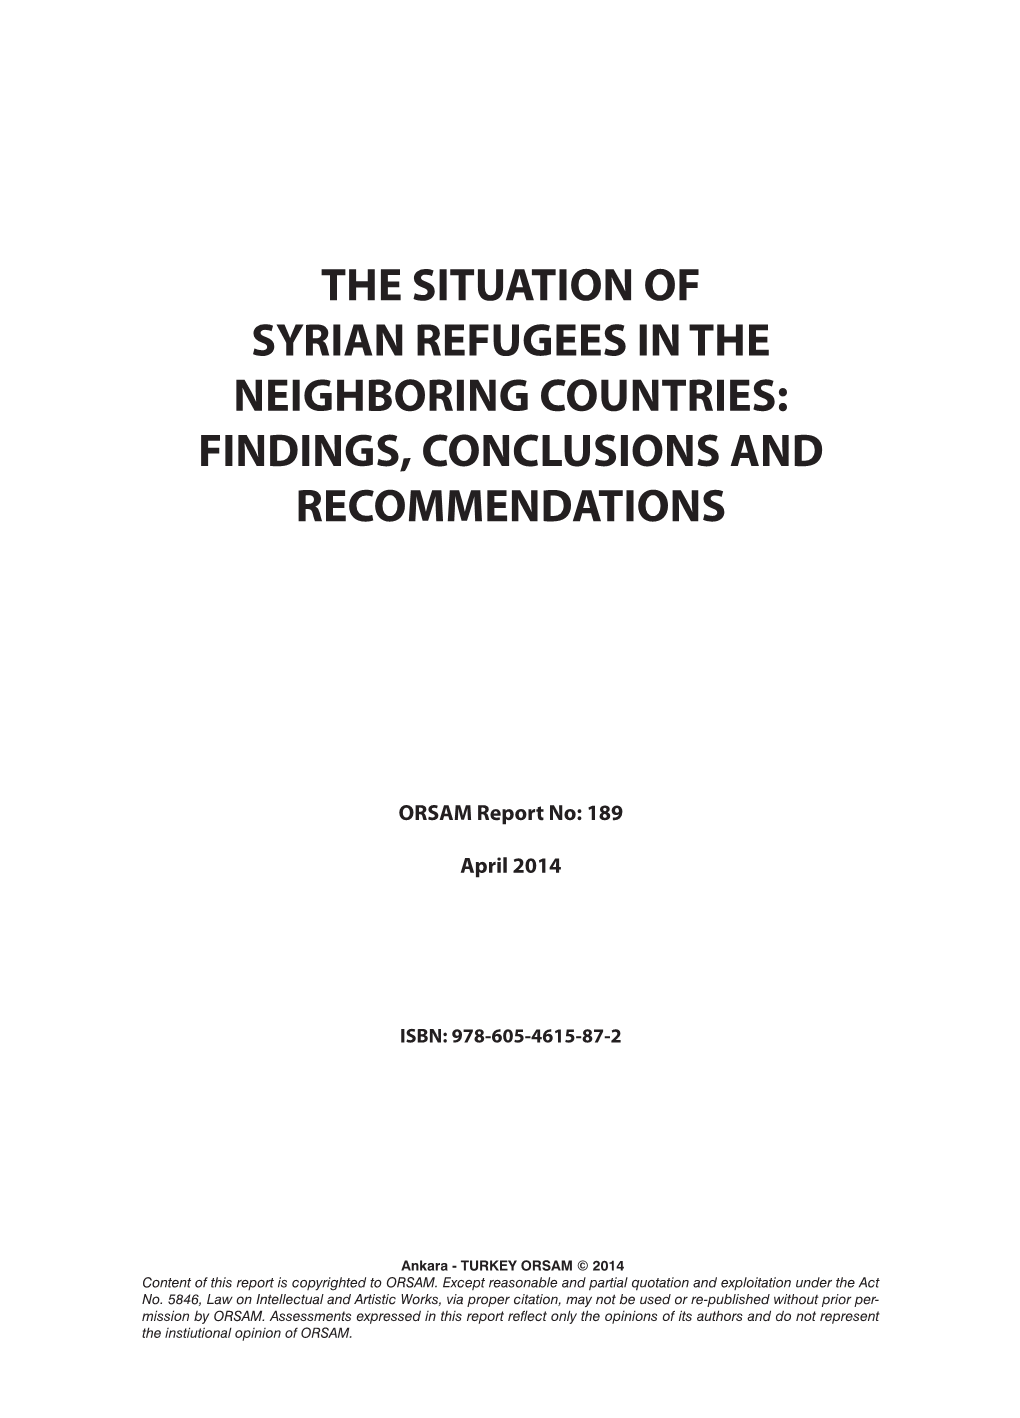 The Situation of Syrian Refugees in the Neighboring Countries: Findings, Conclusions and Recommendations